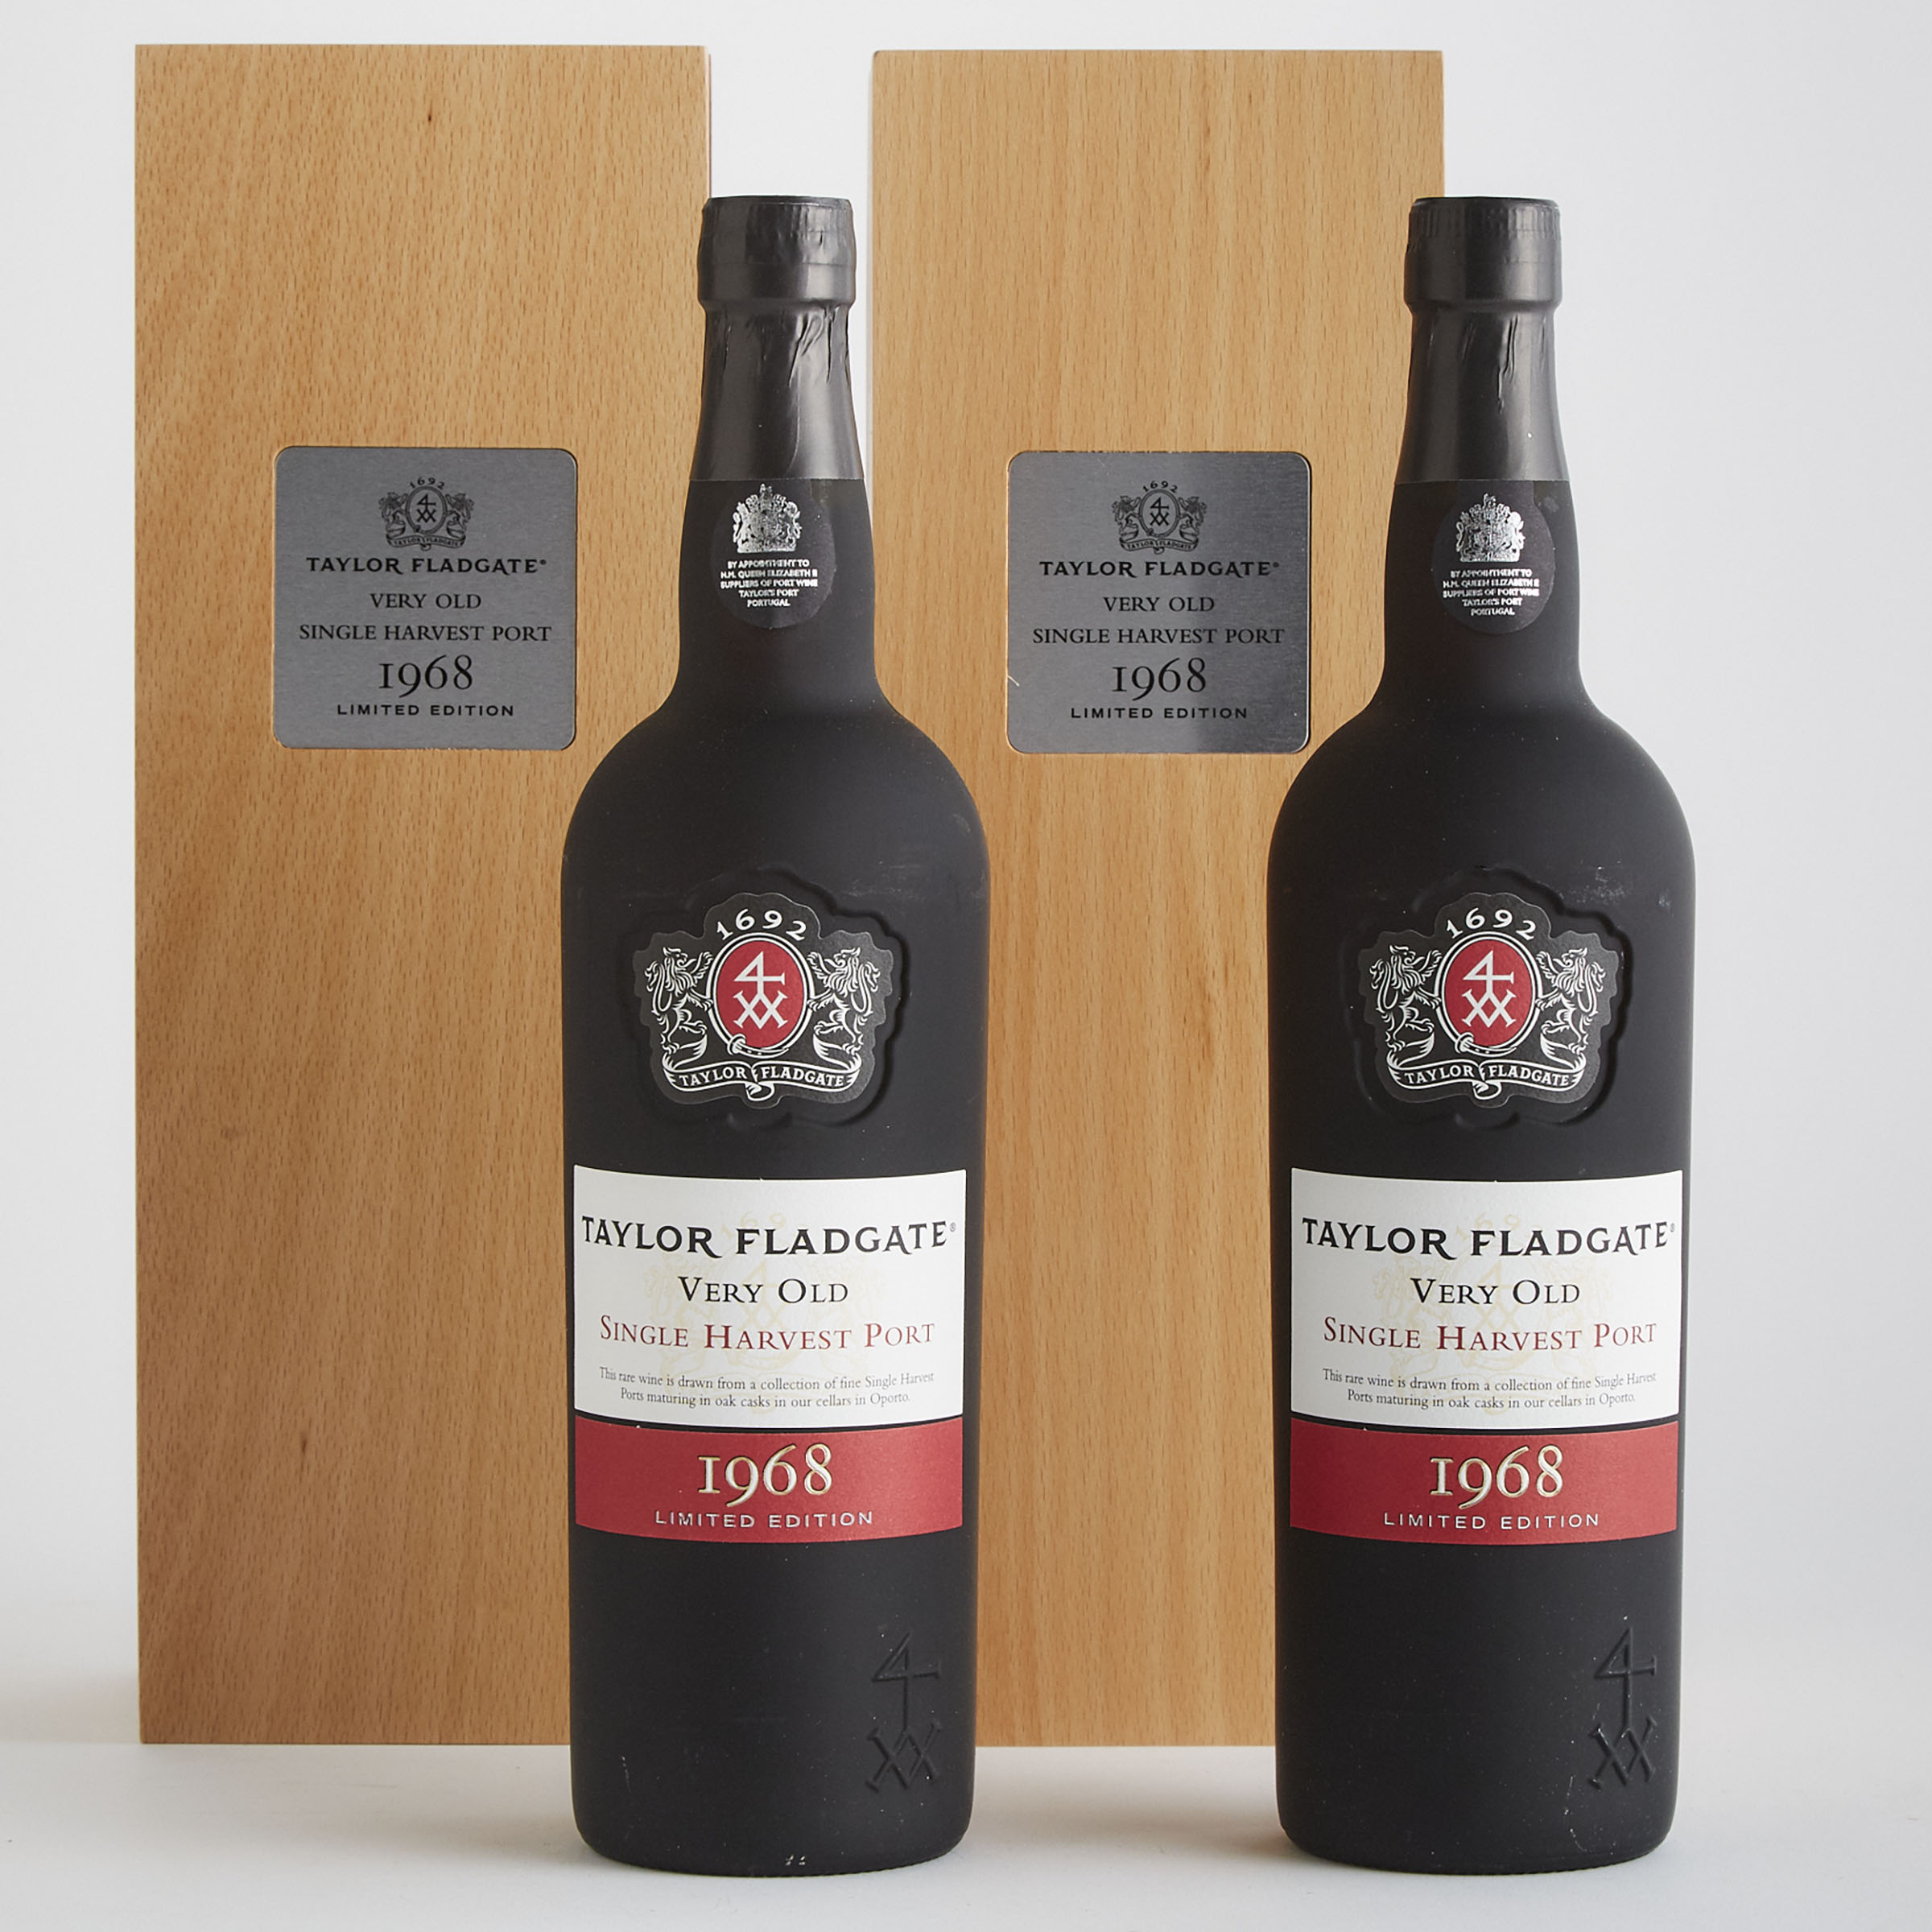 TAYLOR FLADGATE VERY OLD SINGLE HARVEST PORT 1968 (2, OWC) WA 94